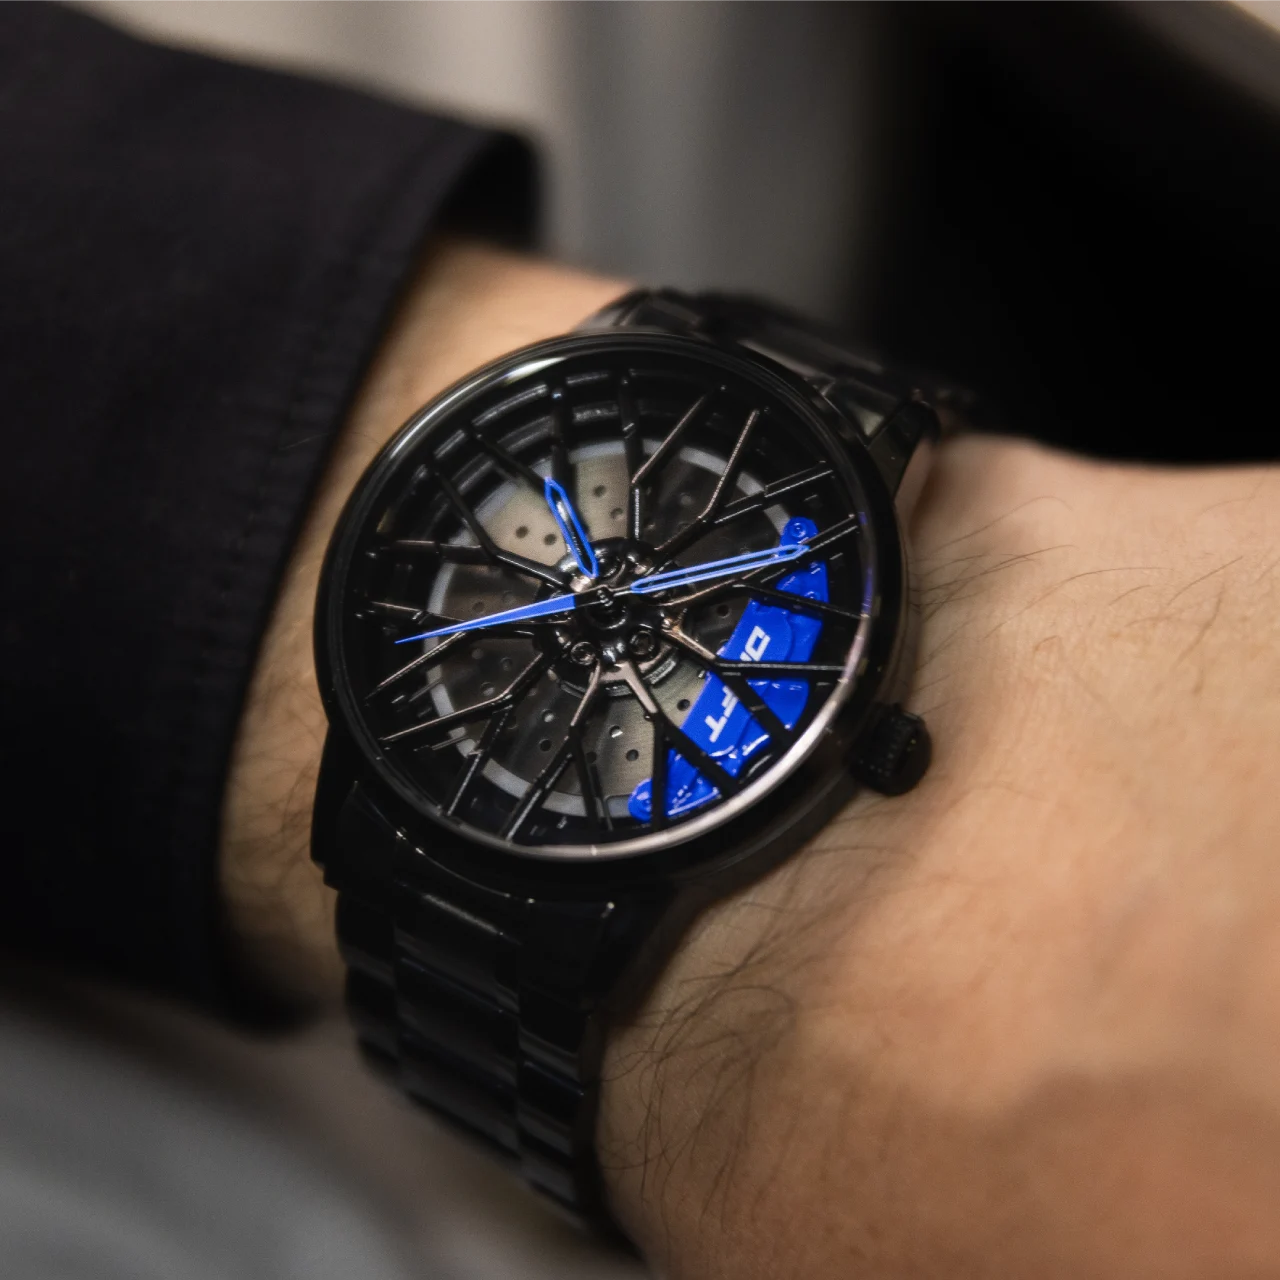  Rev up your style with our blue Motorsport Rim Watch! Crafted by a German startup, these precision watches are designed for motorsport, tuning, and auto enthusiasts. Ignite your passion now! #id_46744363008330